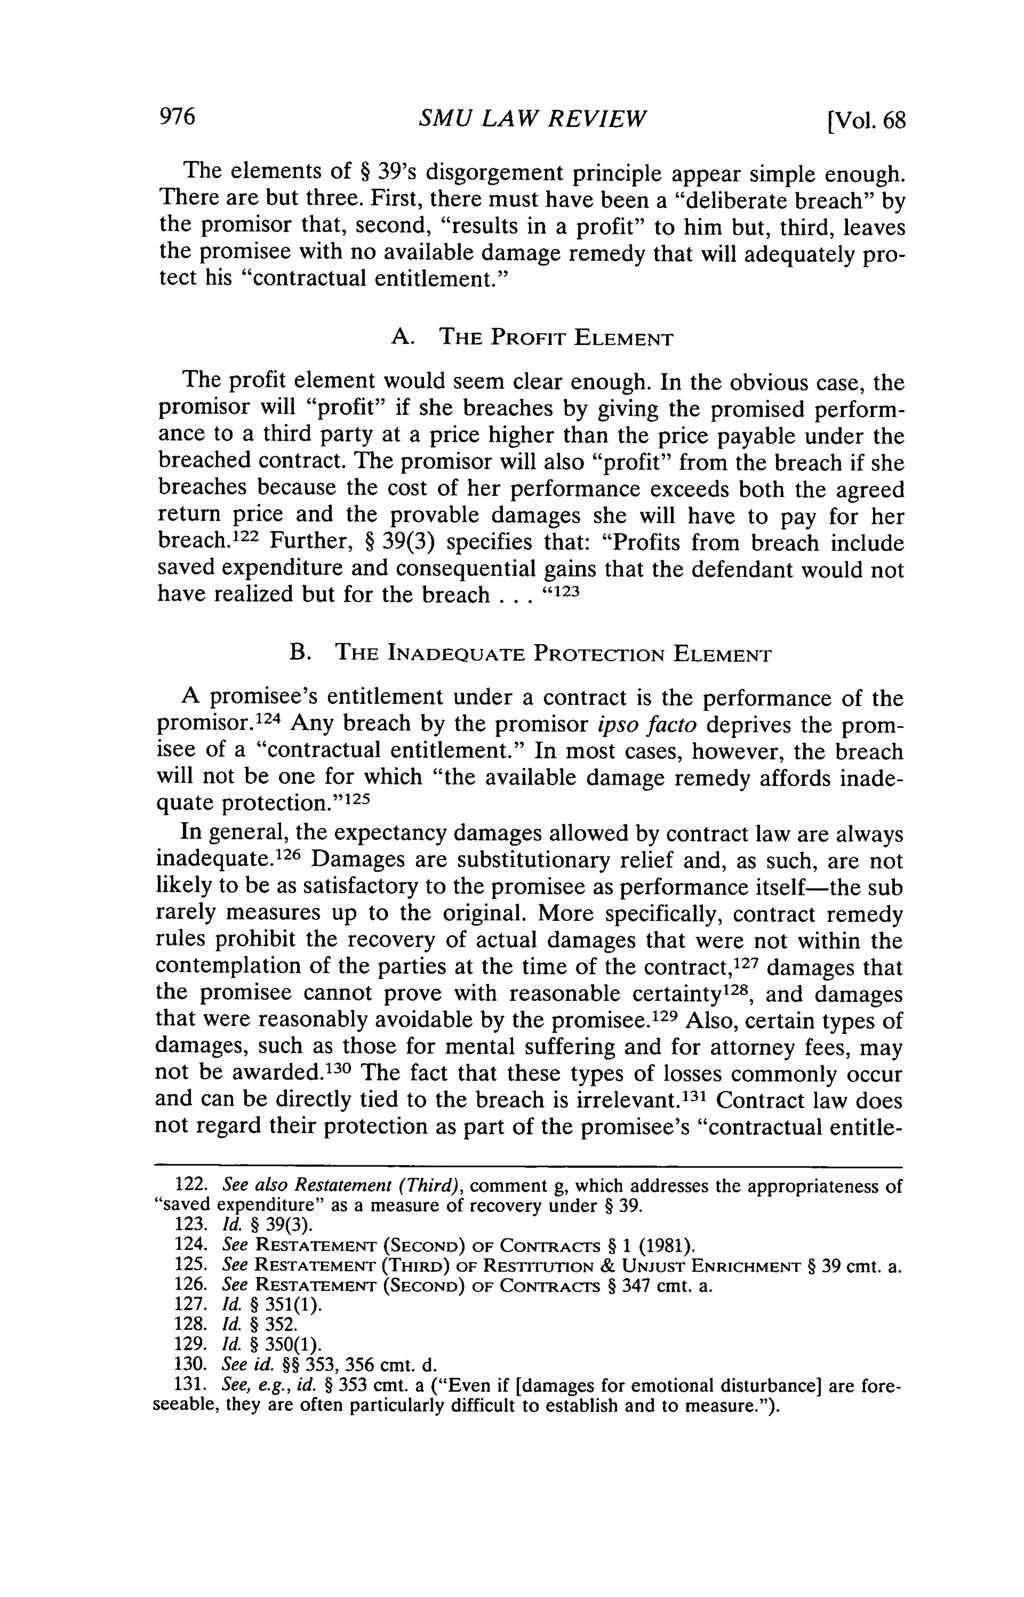 SMU LAW REVIEW [Vol. 68 The elements of 39's disgorgement principle appear simple enough. There are but three.